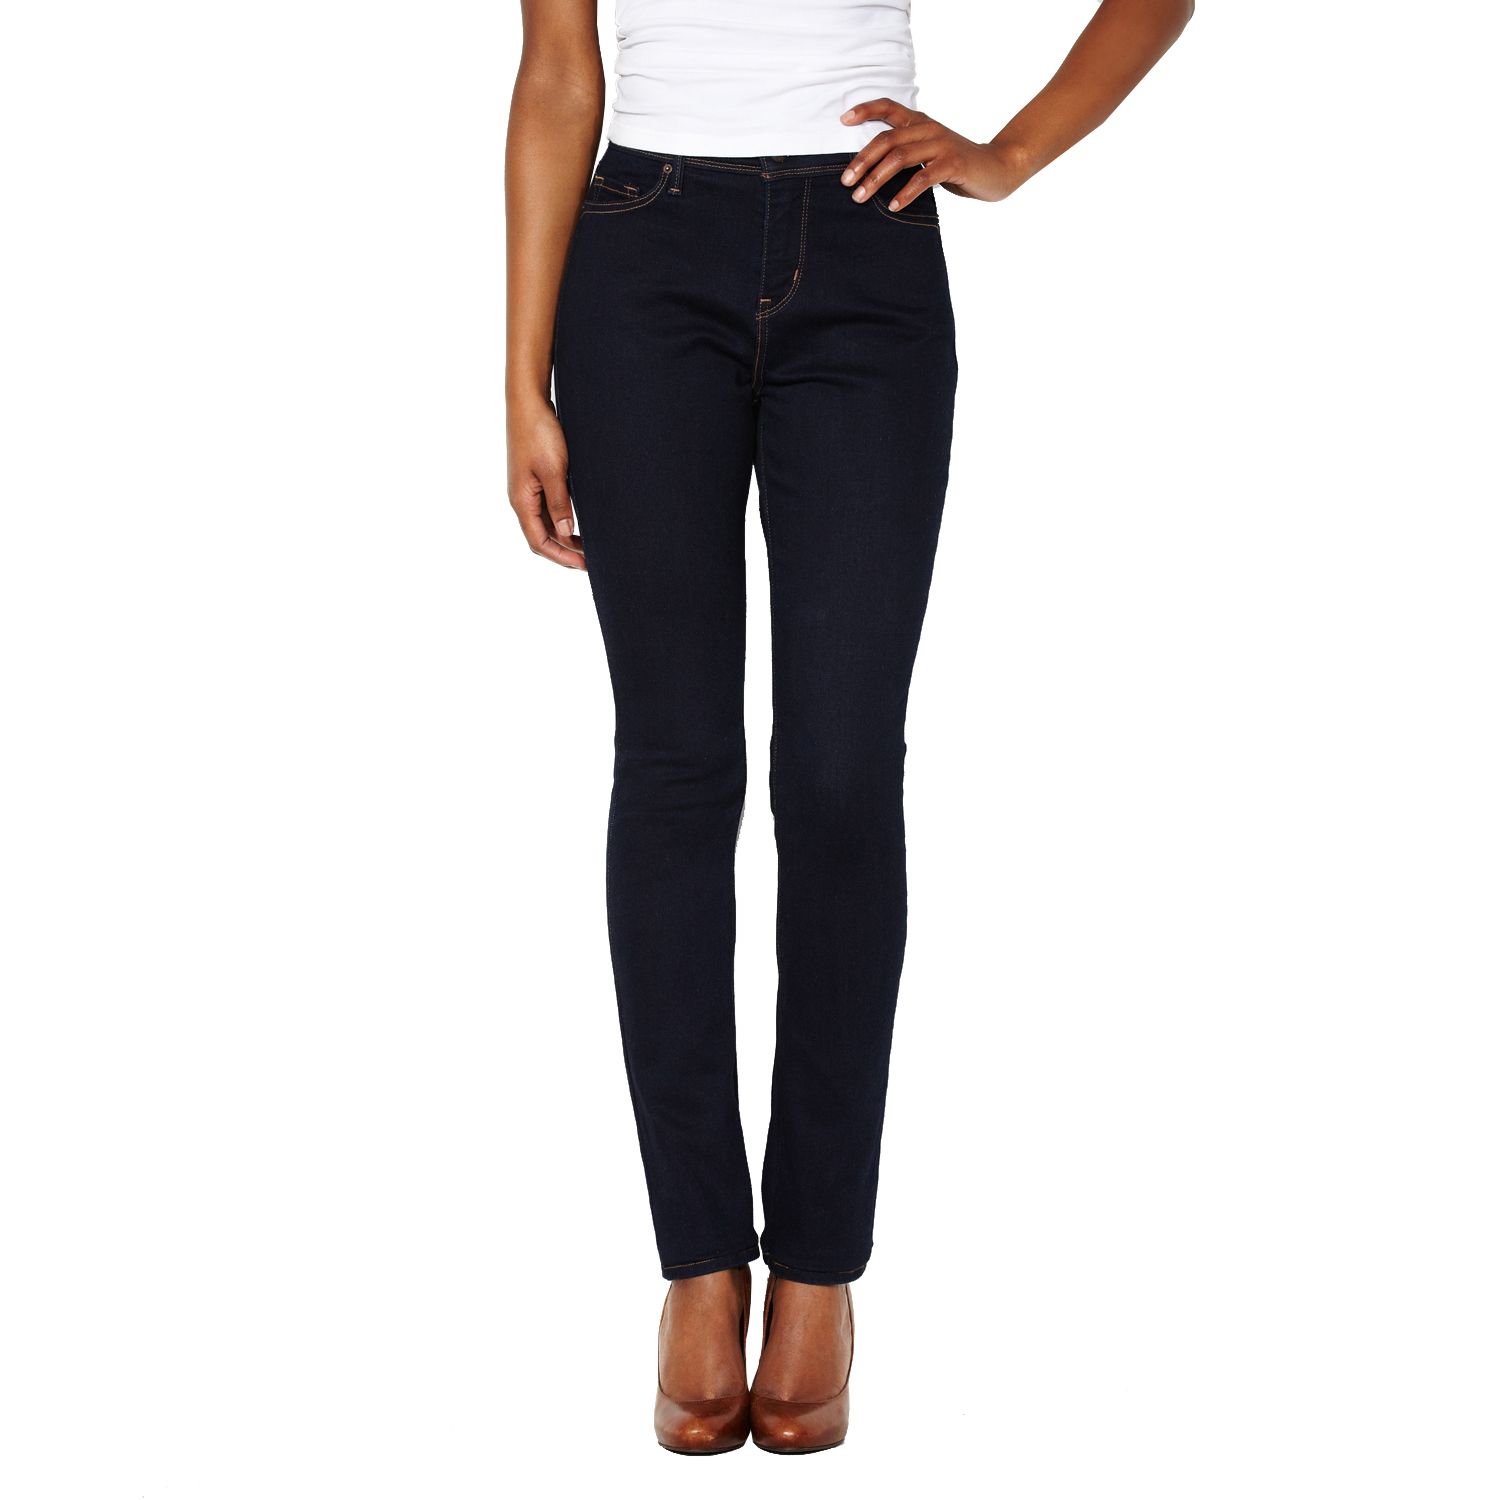 512 Perfectly Slimming Skinny Jeans